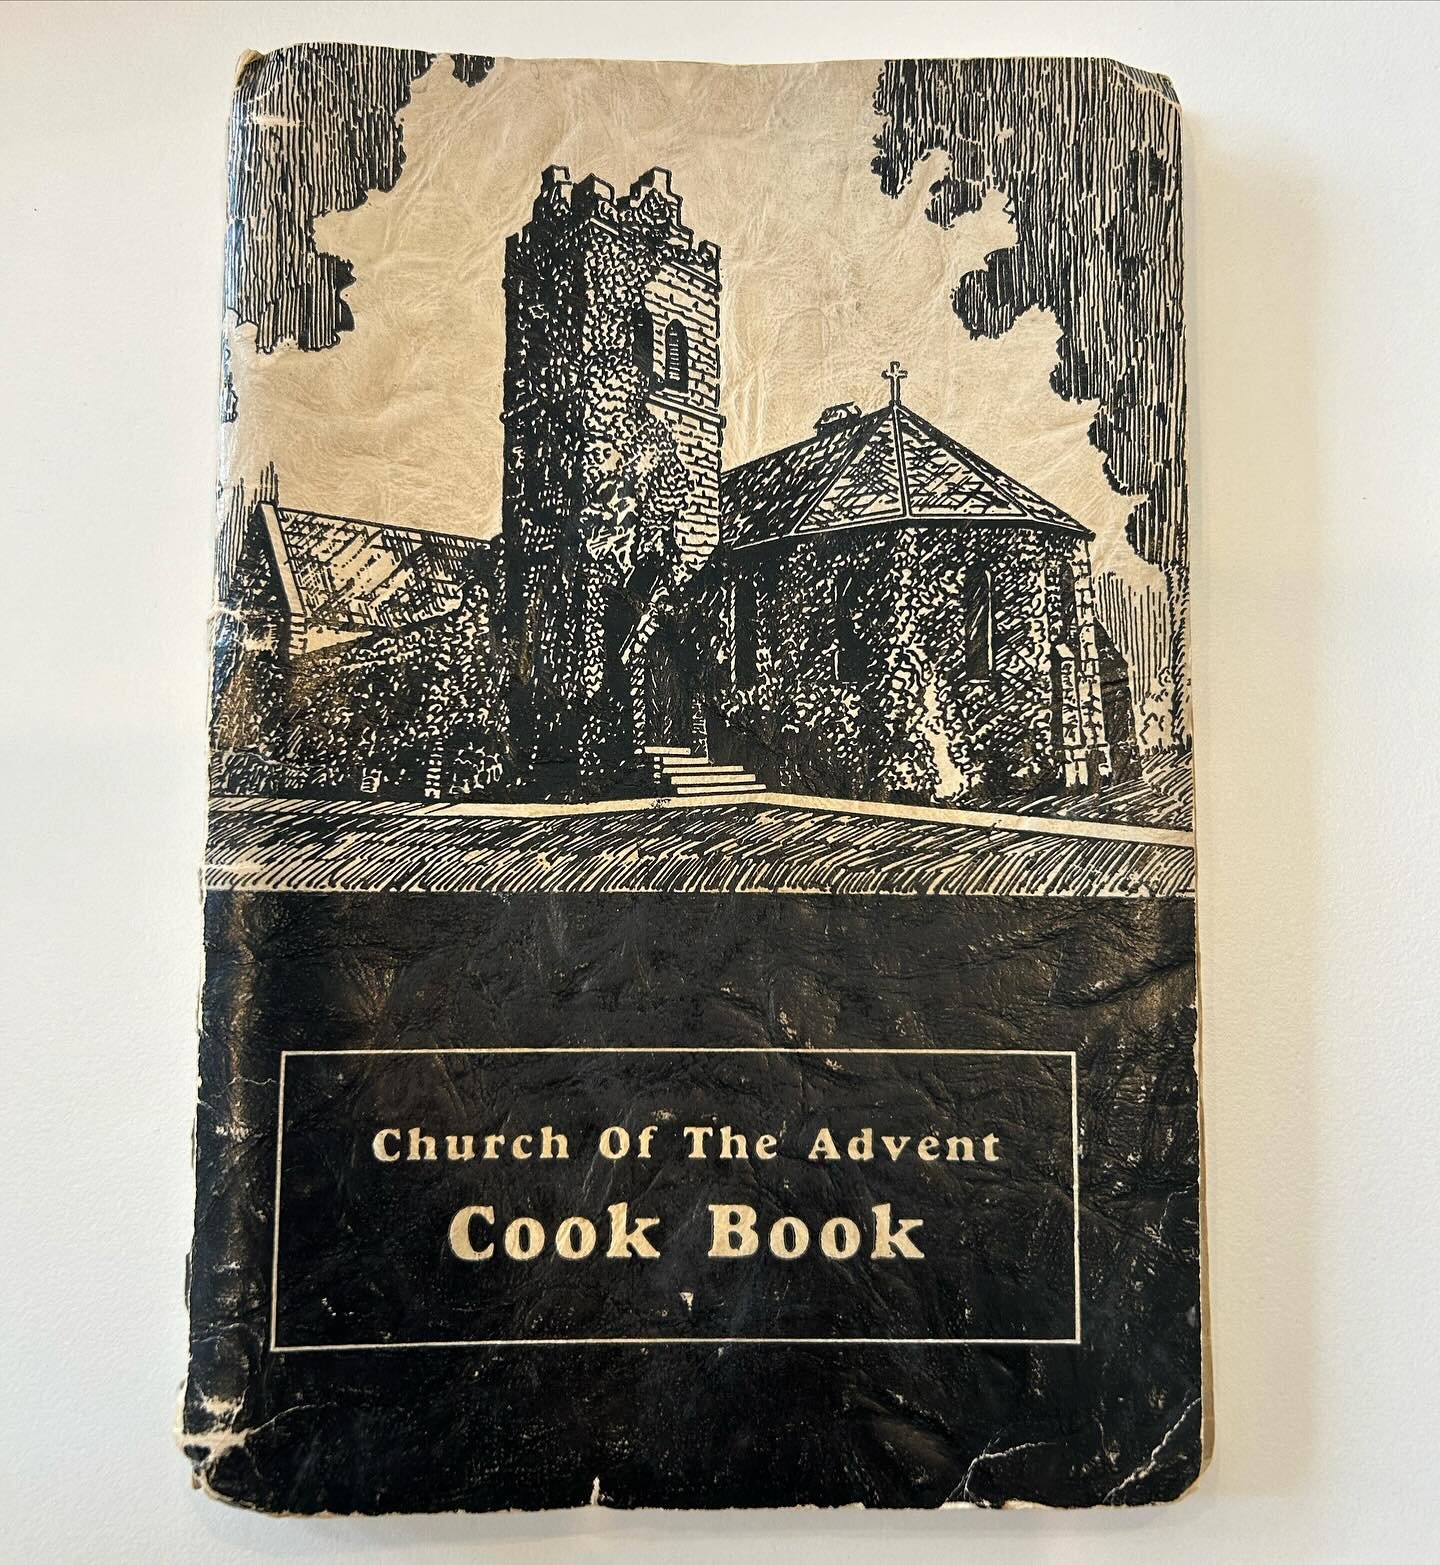 Found this church cookbook deep in our vaults, lovingly compiled by the Women&rsquo;s Auxiliary of Church of the Advent, probably sometime in the early 1940s! 

The book doesn&rsquo;t include a publishing date but mentions in the foreword that it was